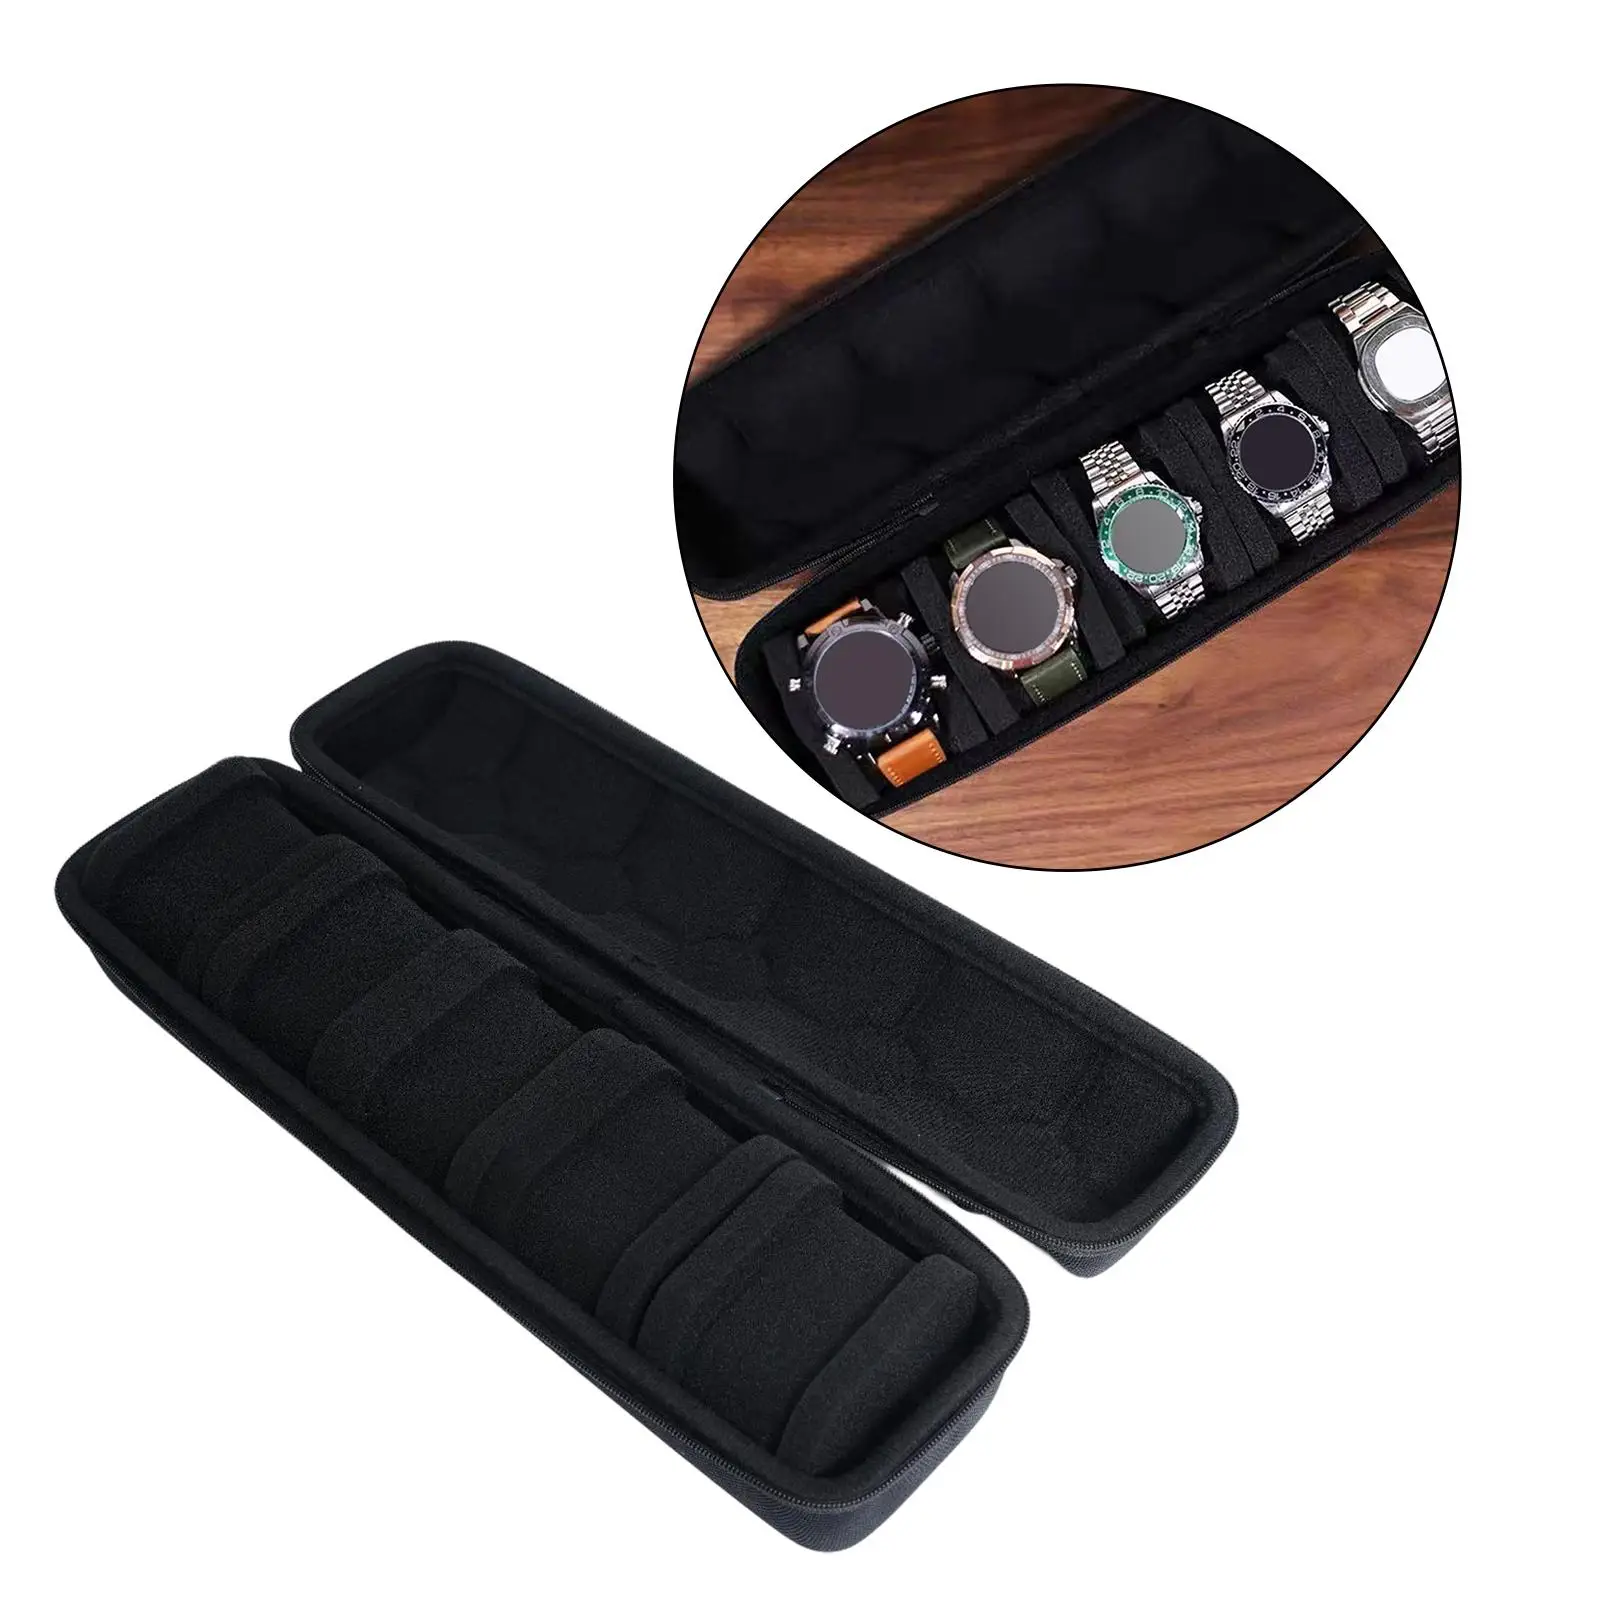 5 Slot Watch Display Holder Storage Box with Convenient Handle Storing Earrings, Bracelets and Other Jewelry Home Decoration